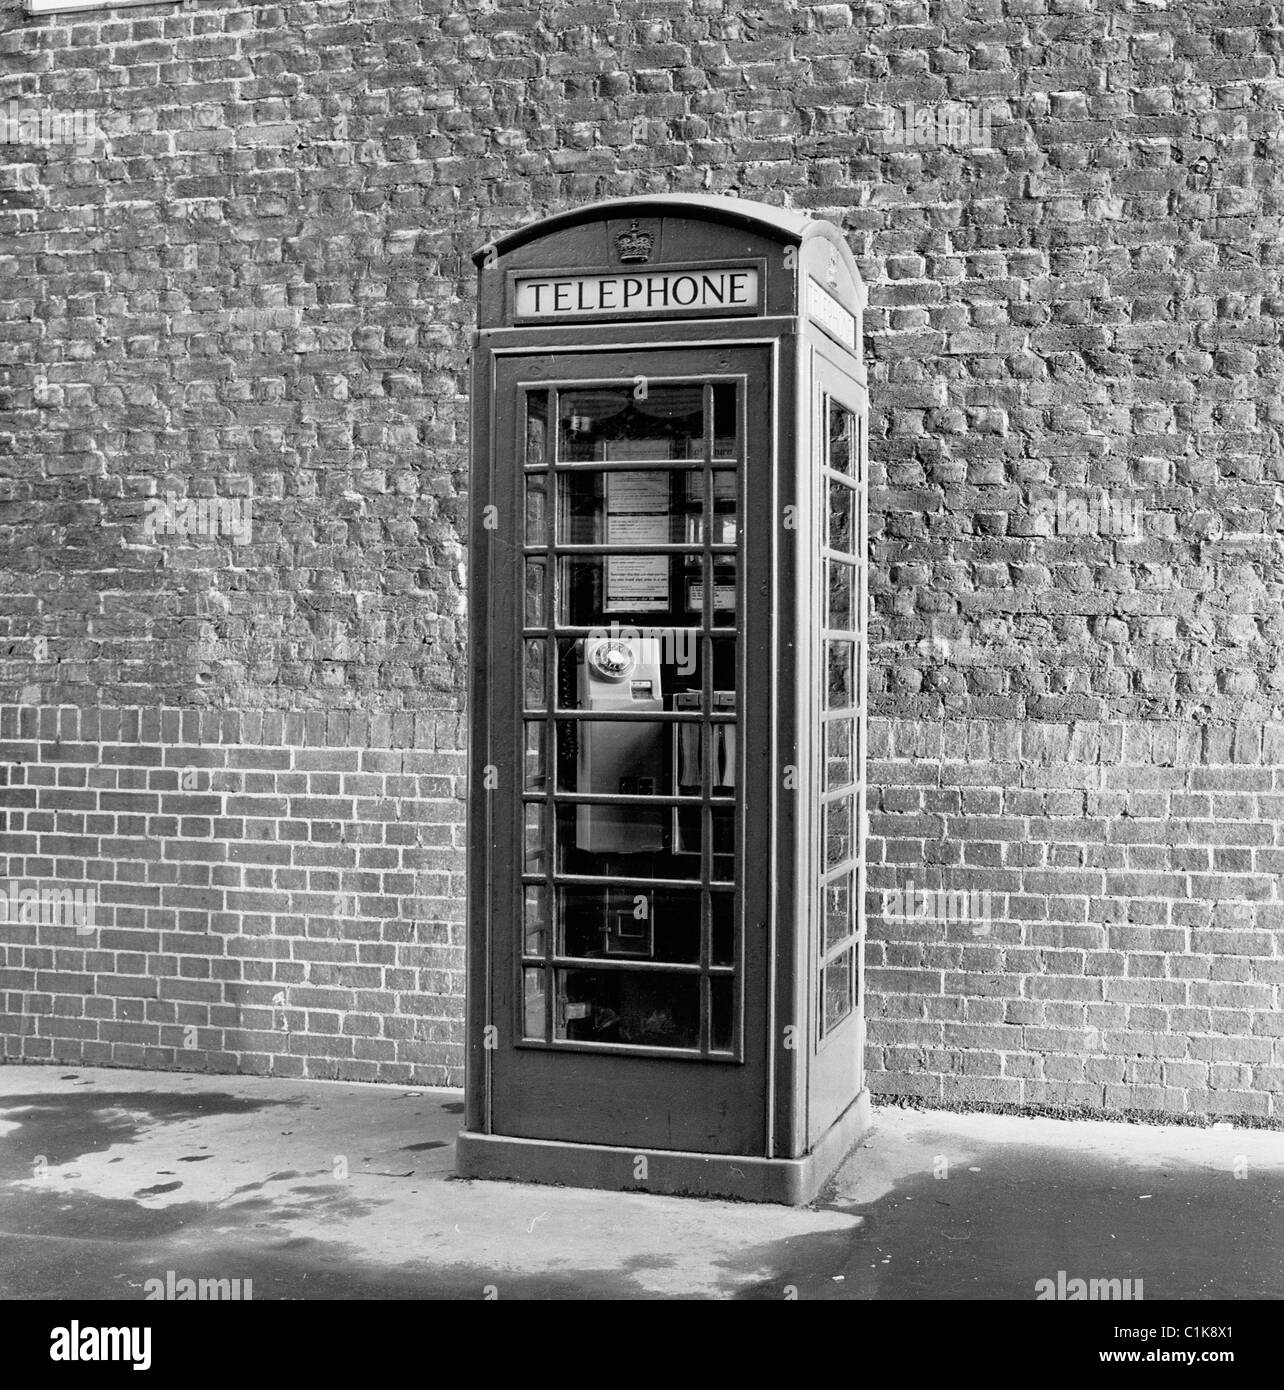 London, 1950s, a photograph by J Allan cash of the iconic British public telephone kiosk designed by Sir Giles Gilbert Scott. Stock Photo